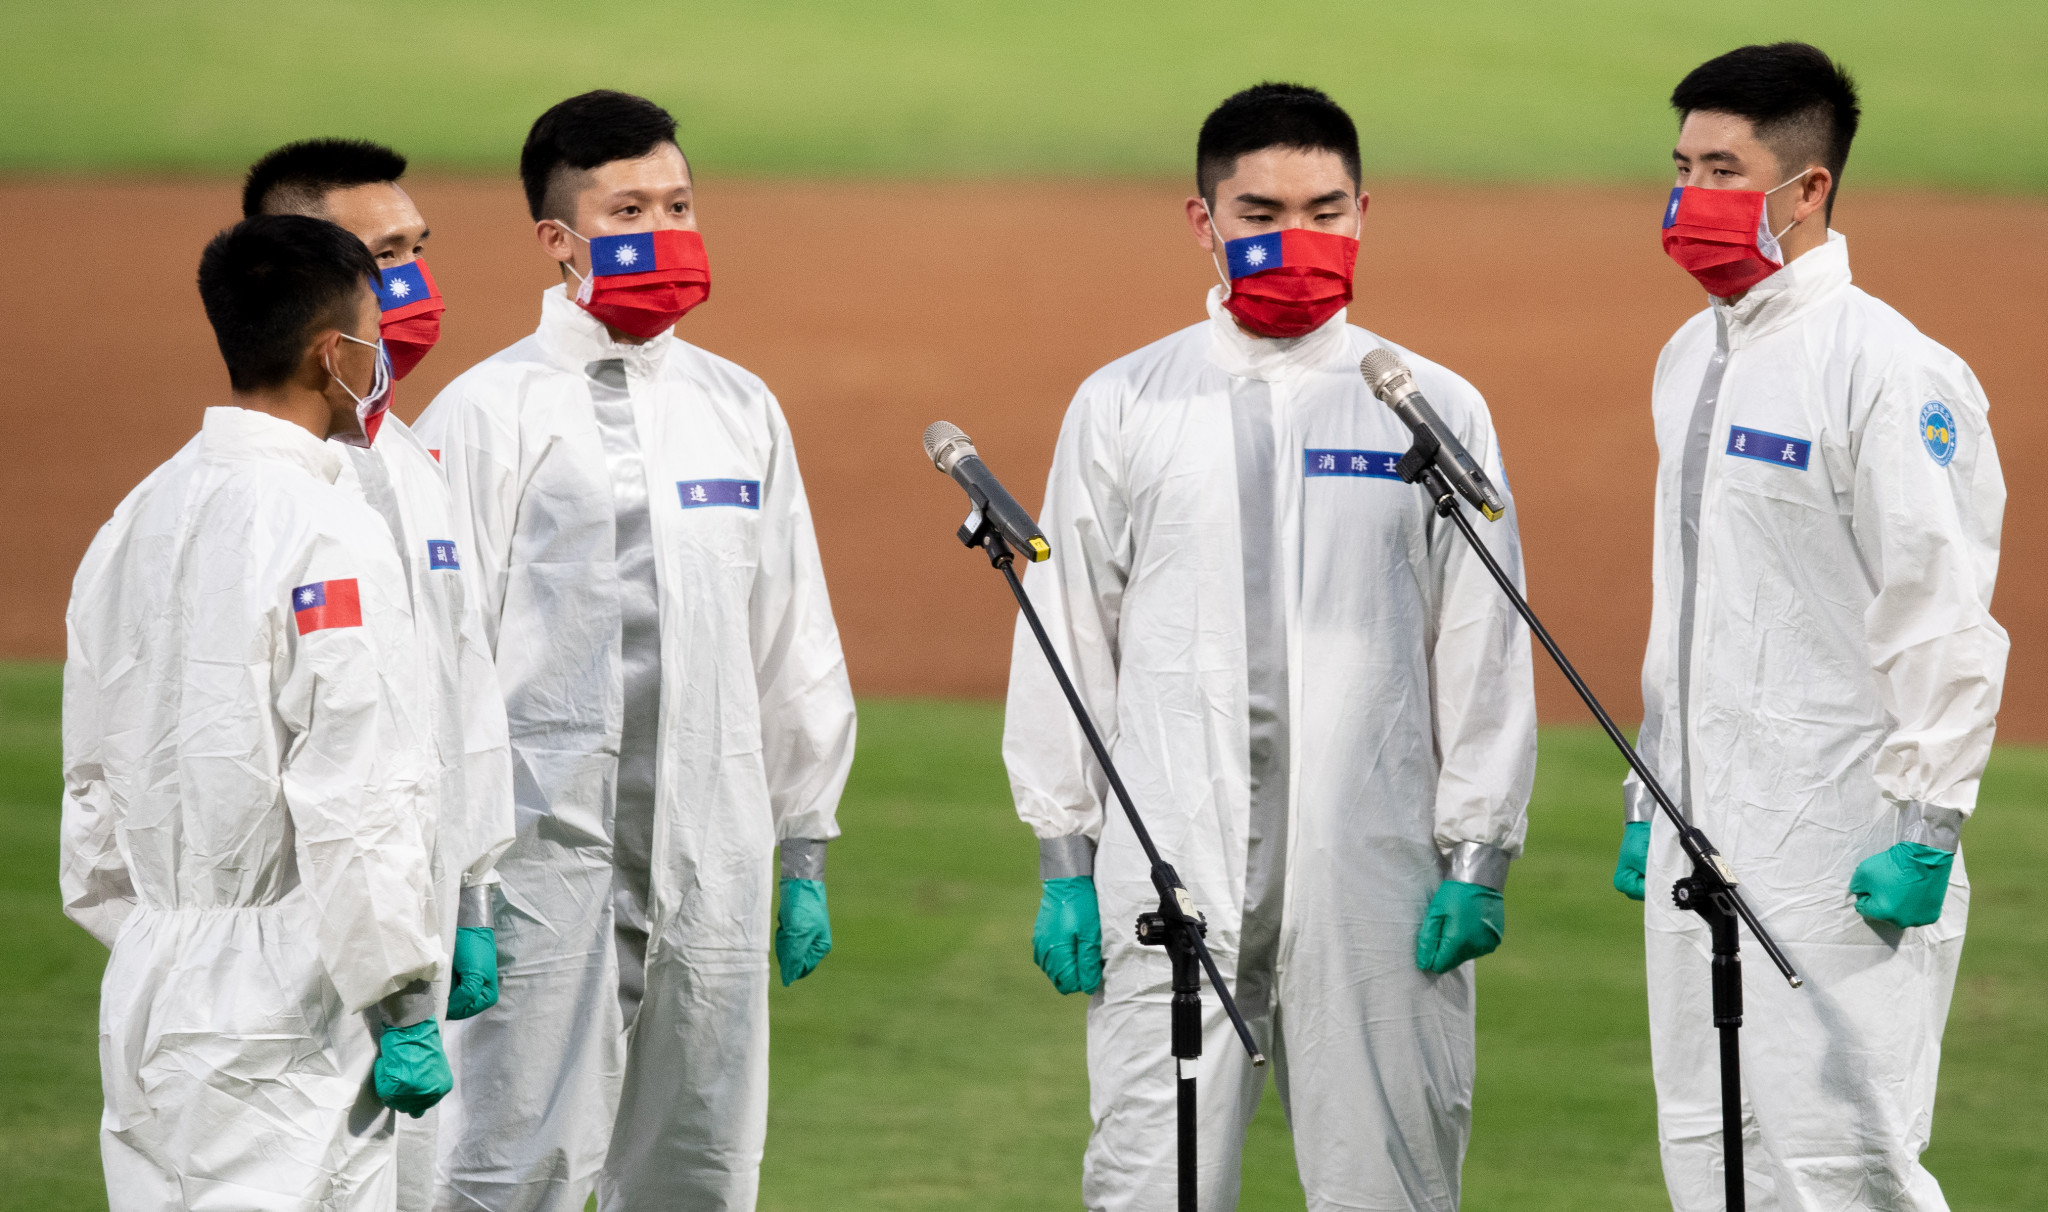 Taiwan has earned praise for its handling of the coronavirus crisis and its baseball league was the first in the world to begin its 2020 season ©Getty Images